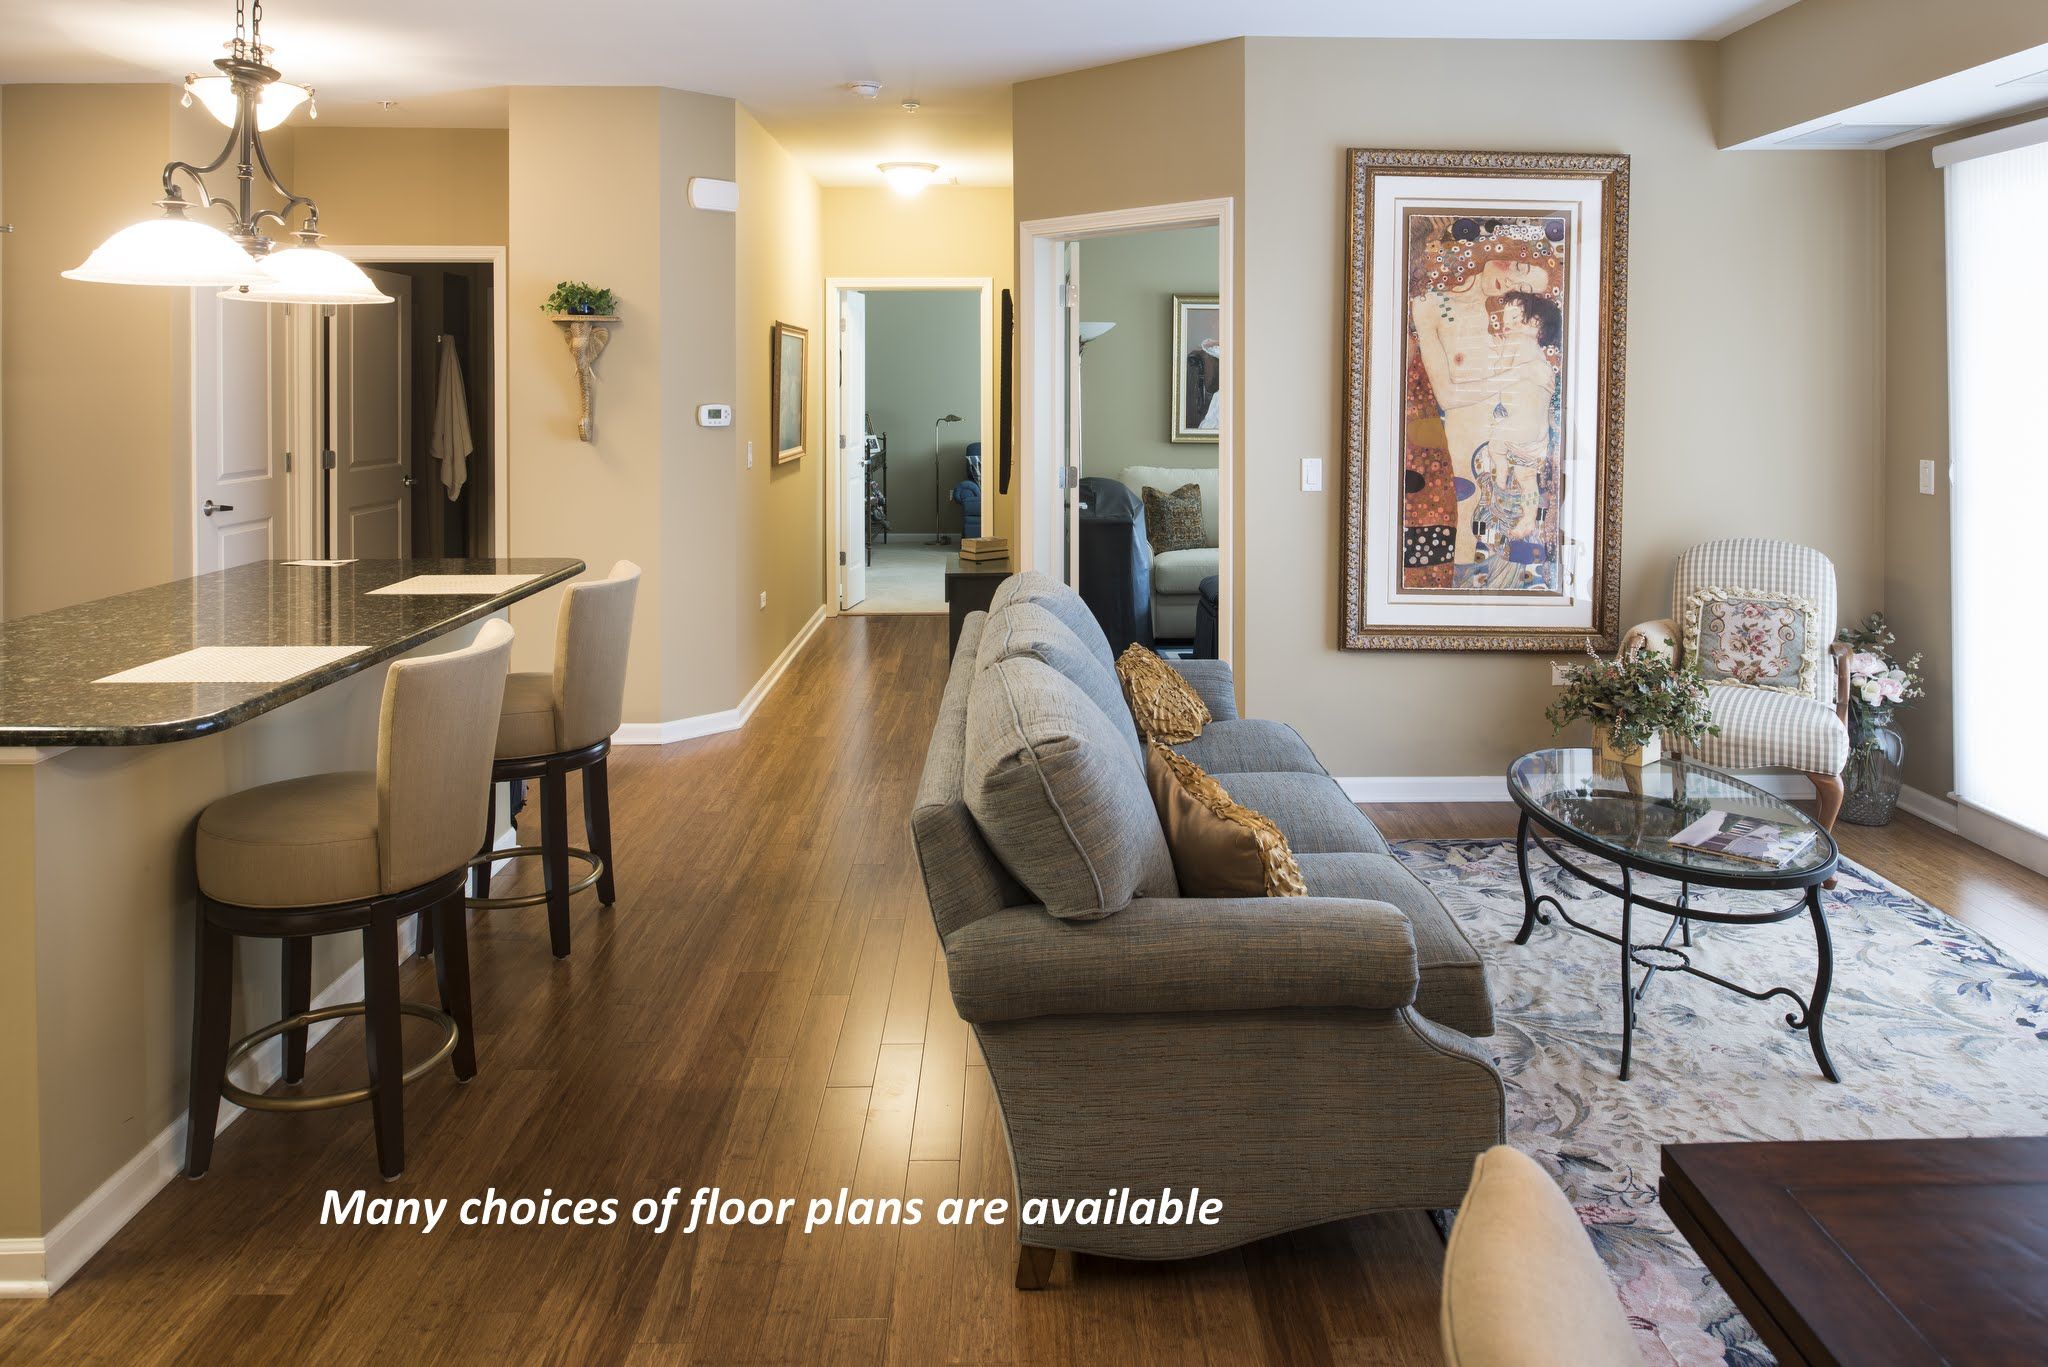 Interior view of The Lodge of Northbrook senior living community featuring elegant architecture and decor.